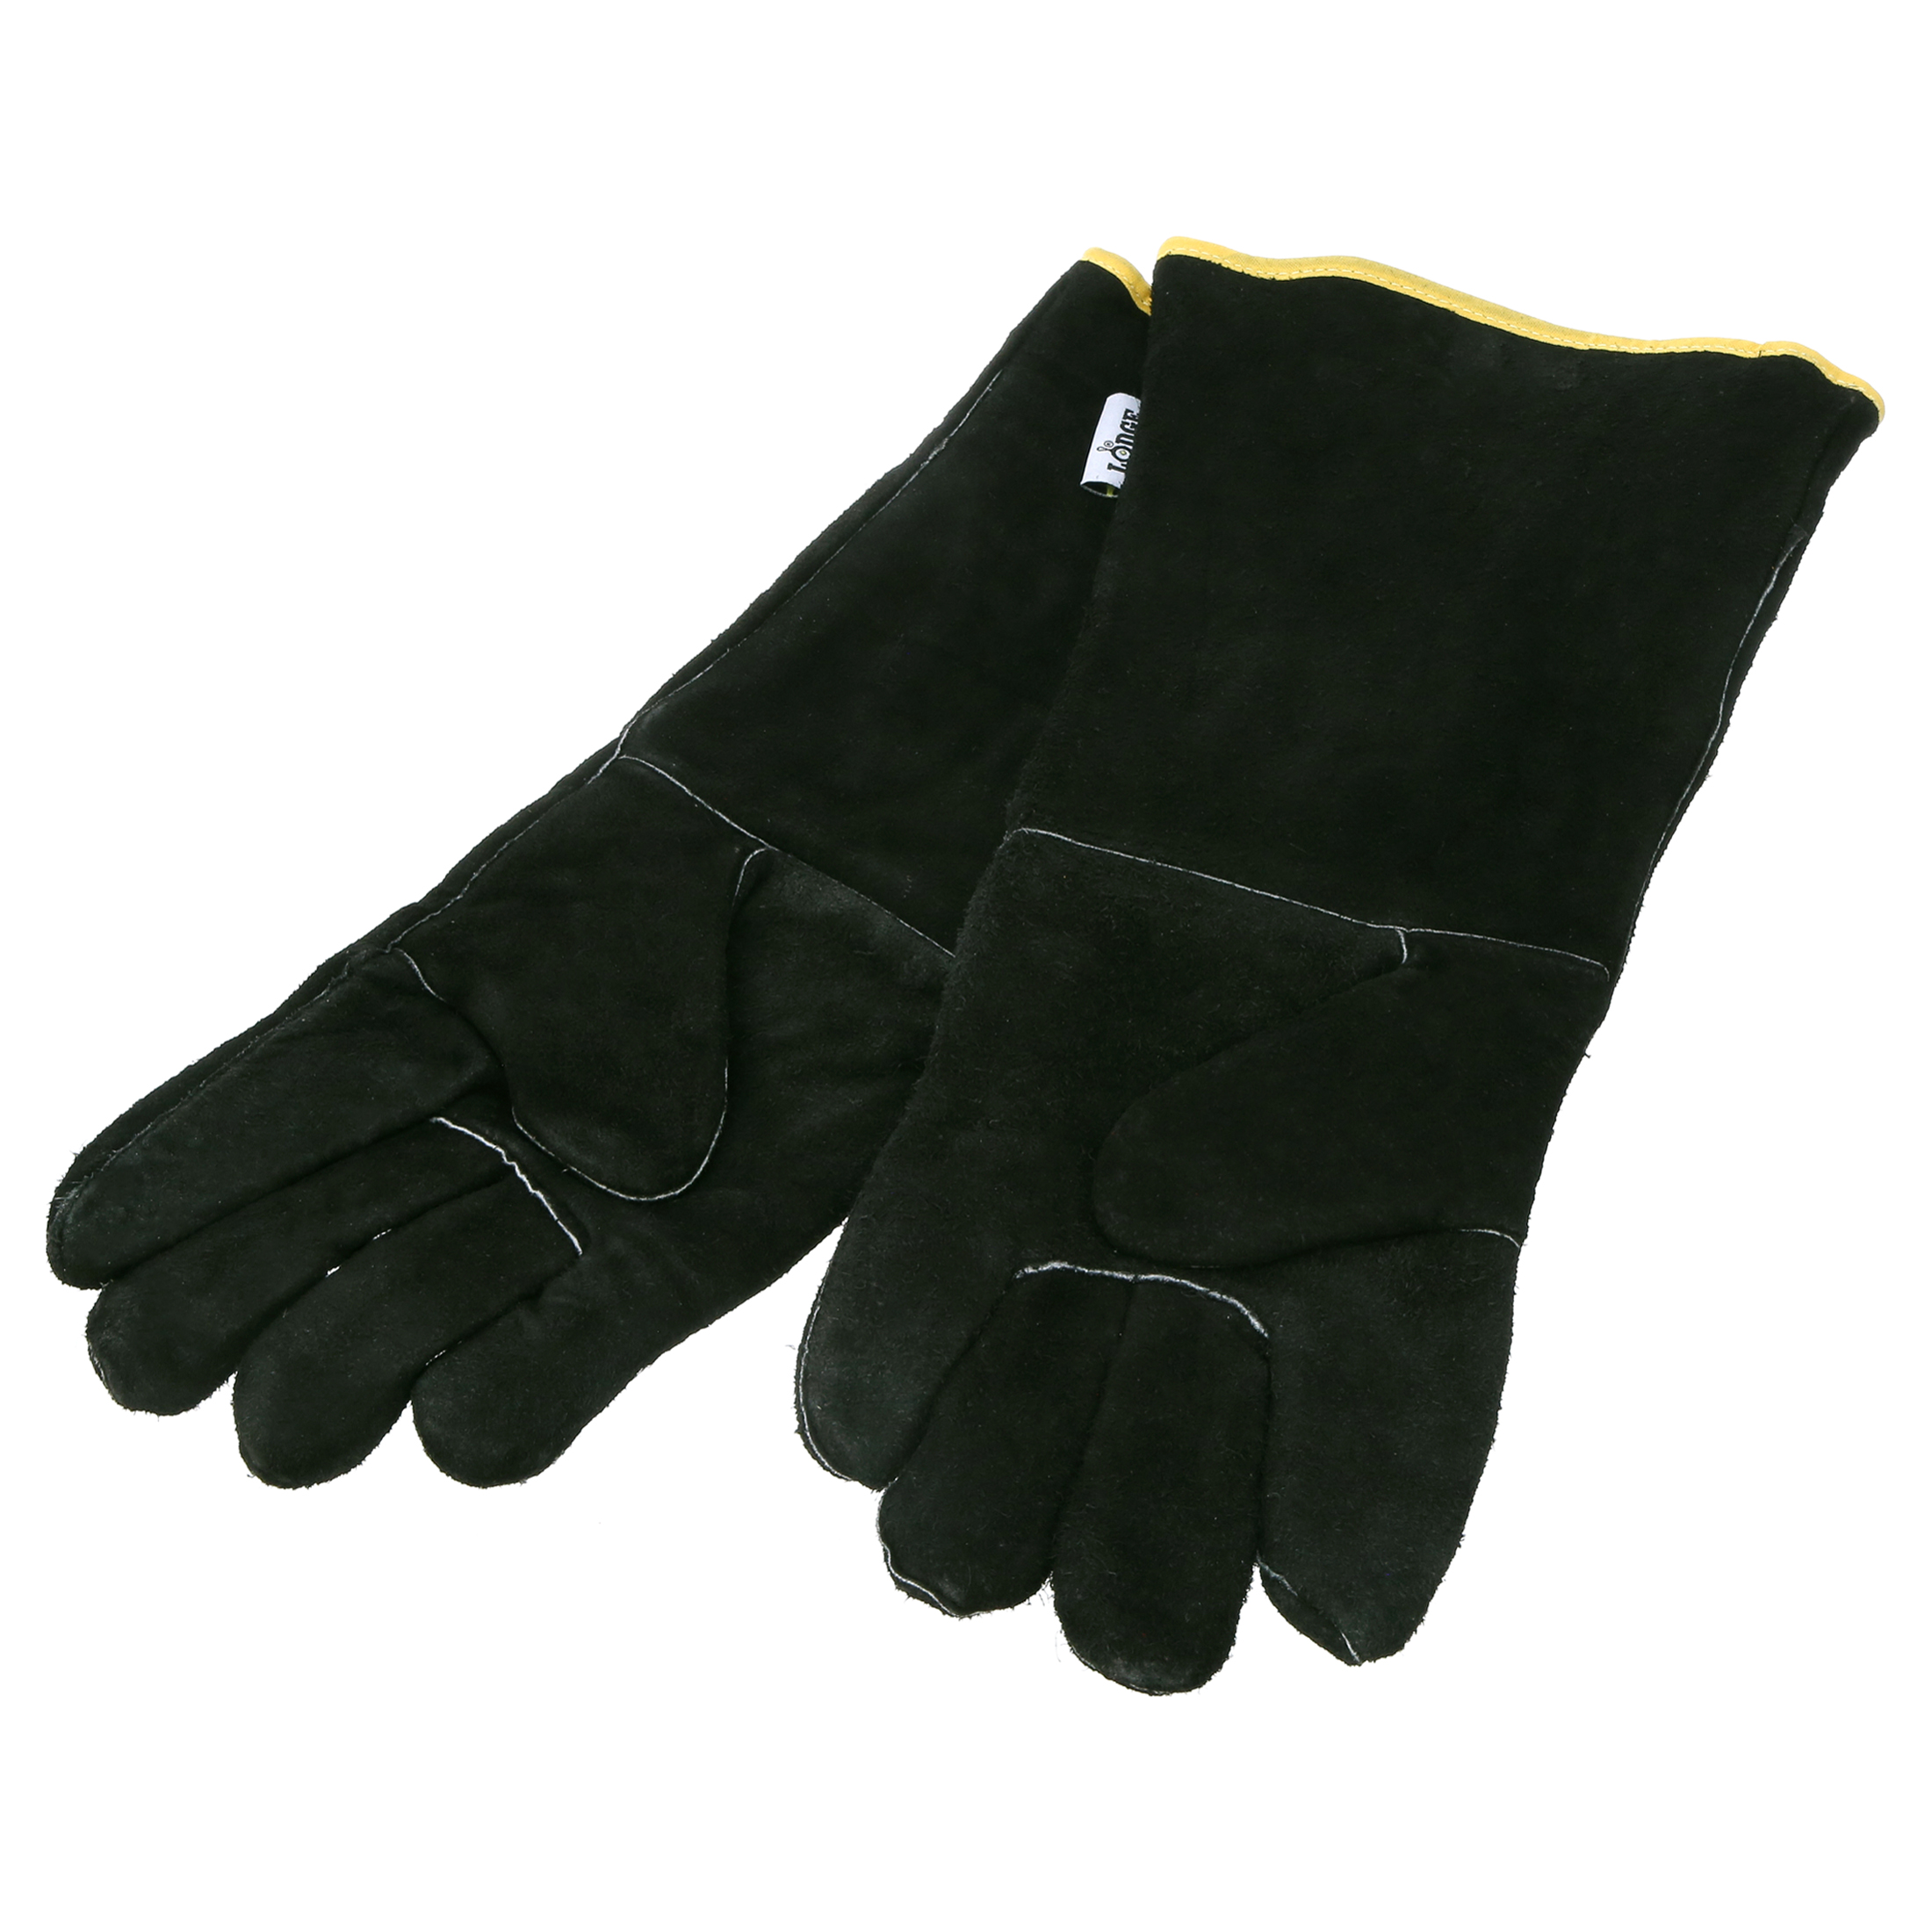 Lodge Cast Iron Logic Leather Gloves A5-2 - image 4 of 6